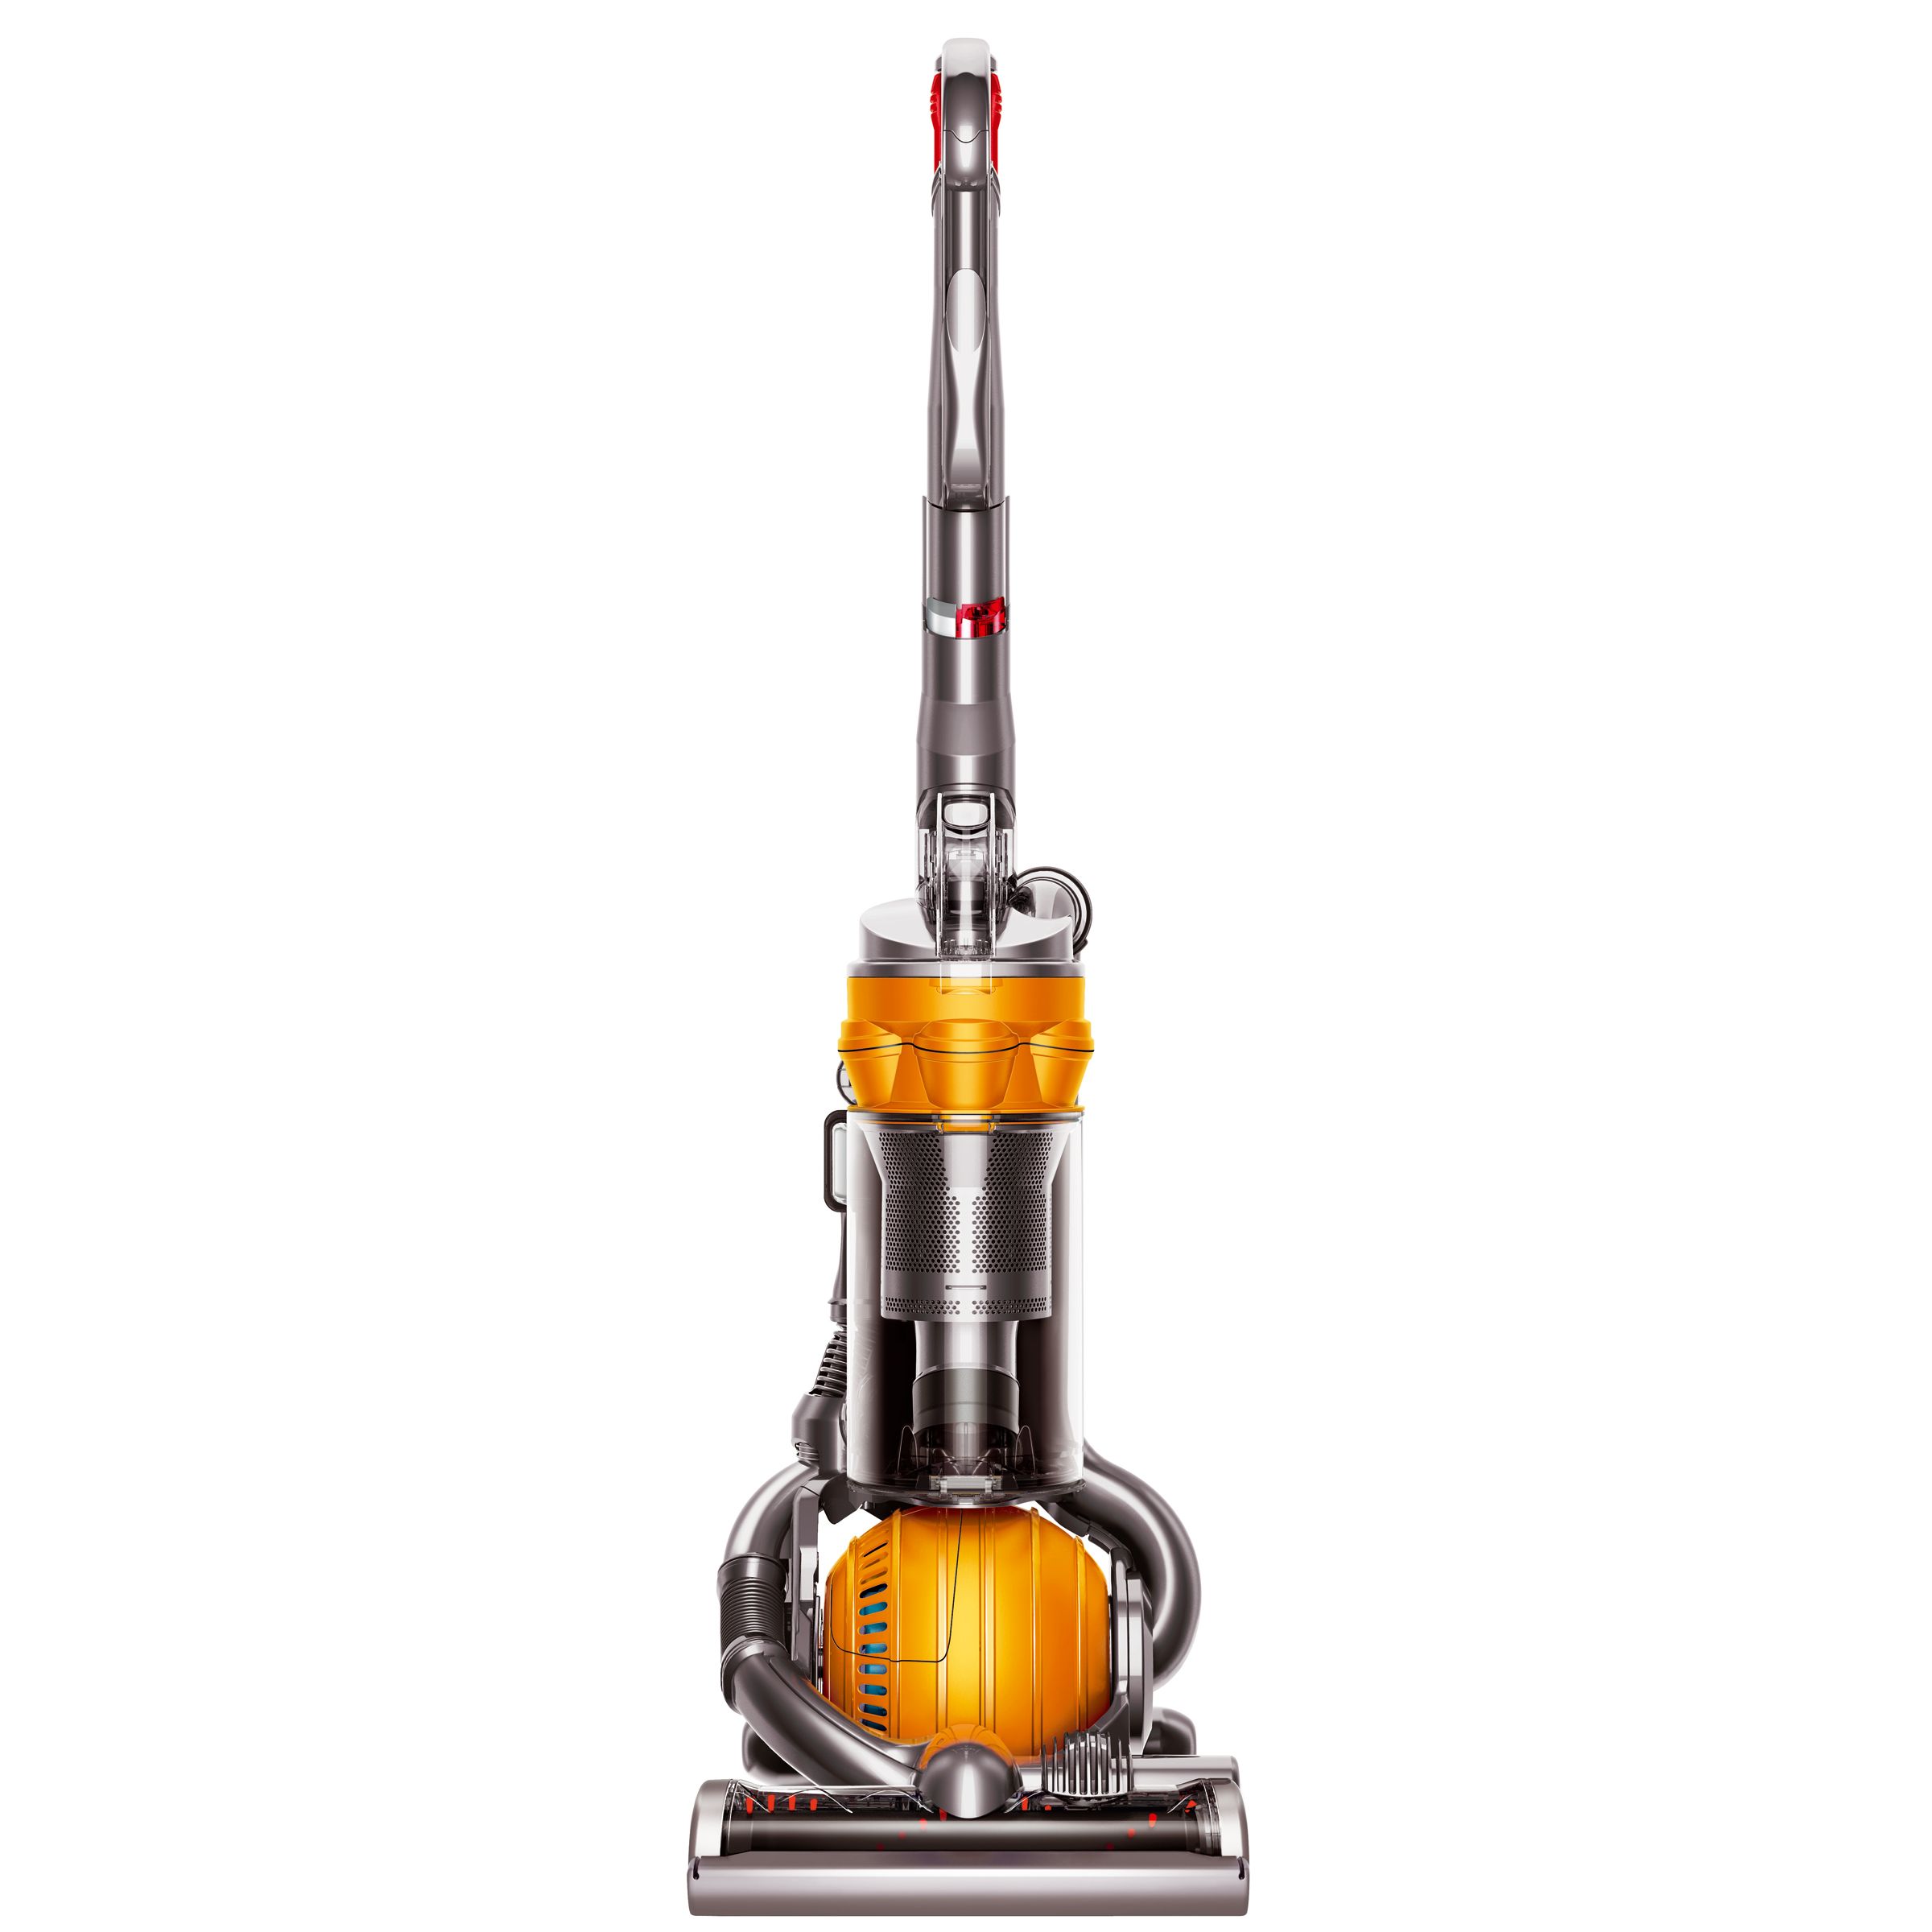 UPC 879957001701 product image for Dyson DC25 All Floors Upright Vacuum Cleaner CLOSEOUT - DYSON | upcitemdb.com